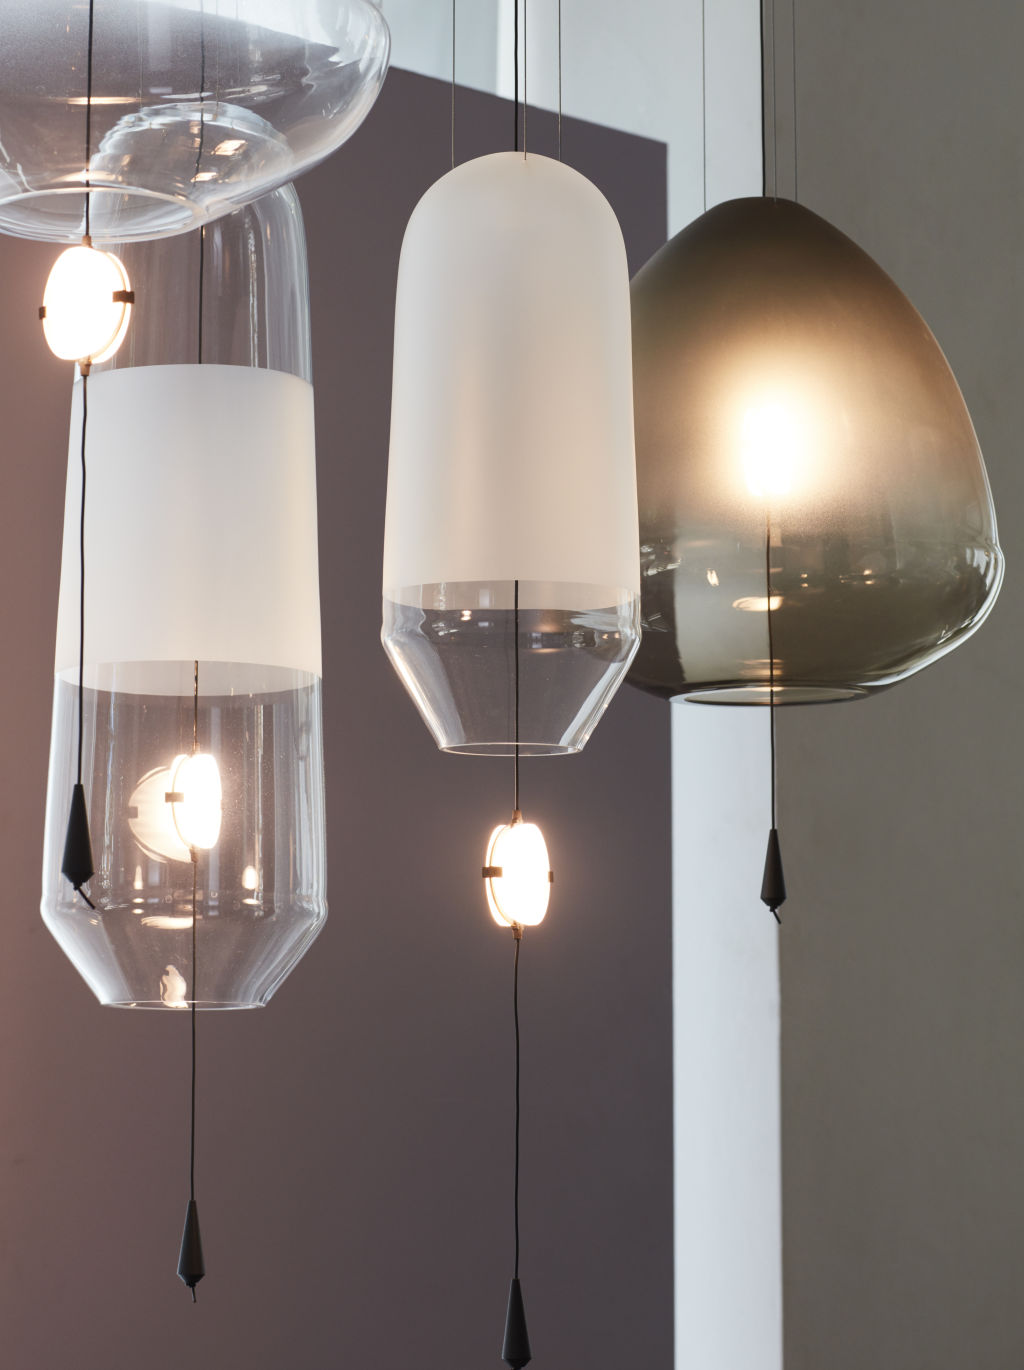 Limpid Lighting by VANTOT from Spence and Lyda. Photo: Prue Roscoe